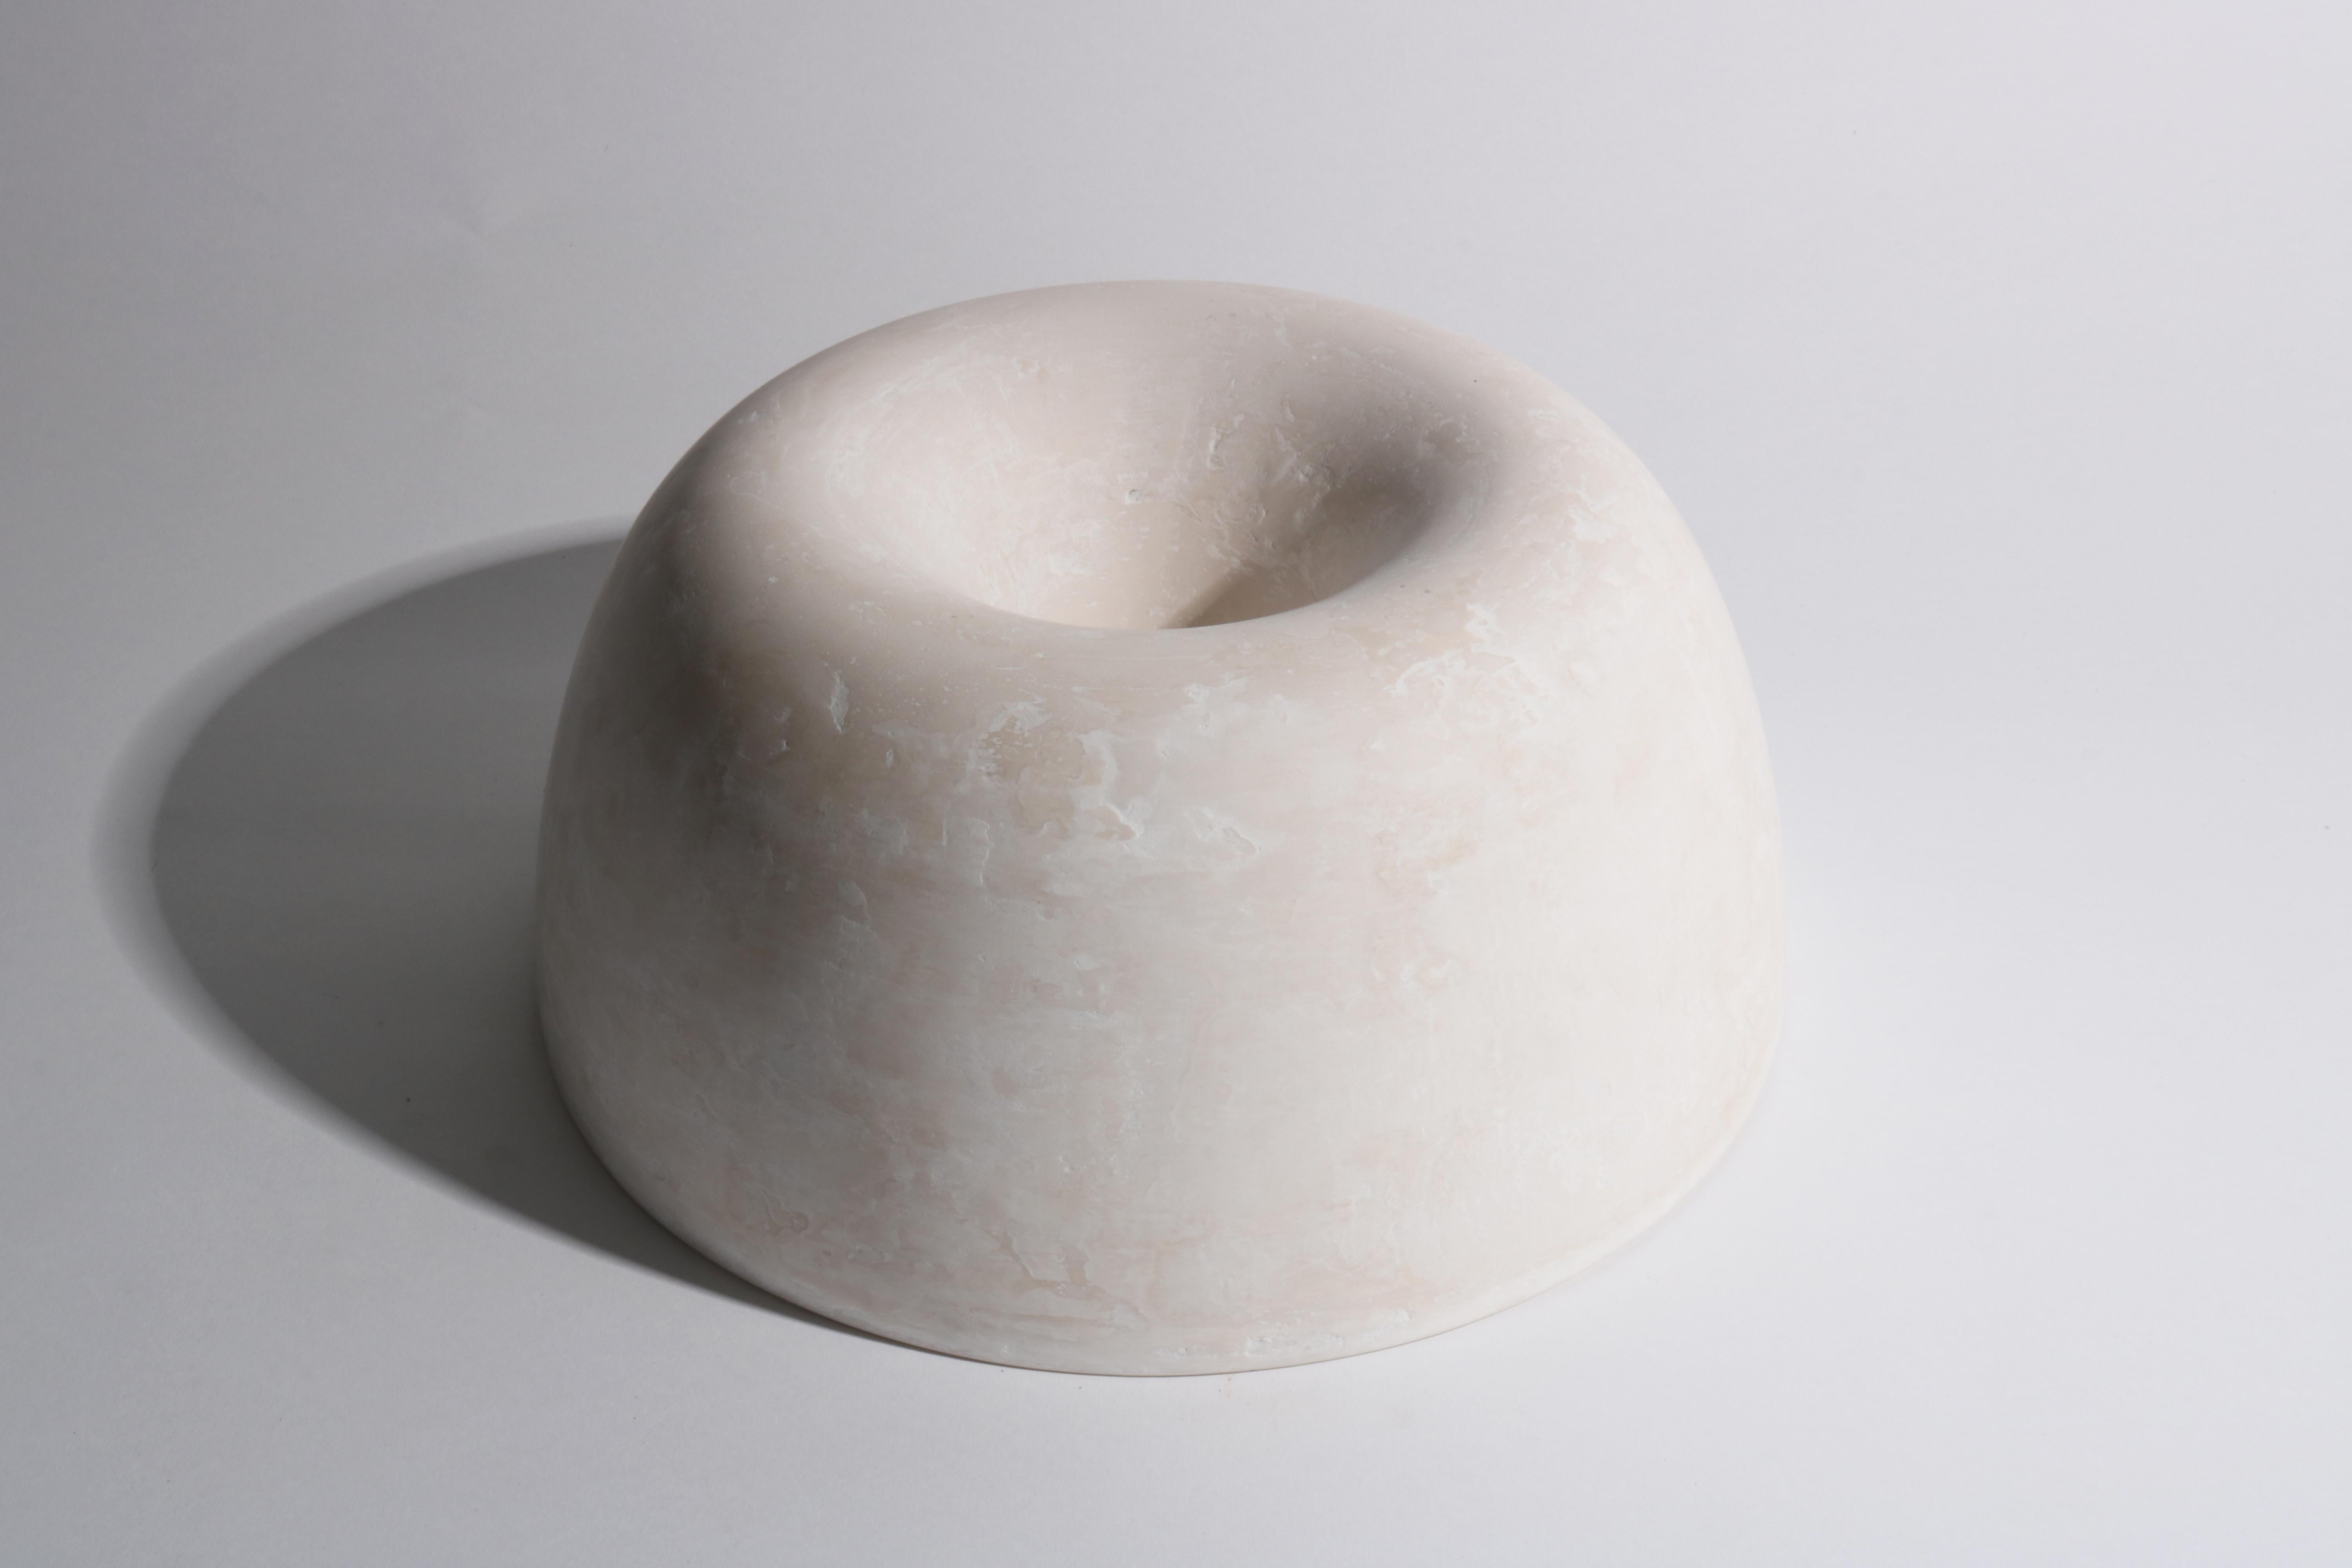 Twirl Bowl, Ivory White

Production: Made to order, Other designs can be made on request.

Material: Alpha crystalline gypsum (Hard plaster)
Finish: Glossy coating
Inside Finish: Glossy coating

Twirl Bowls is a Collection of sculptural bowls made